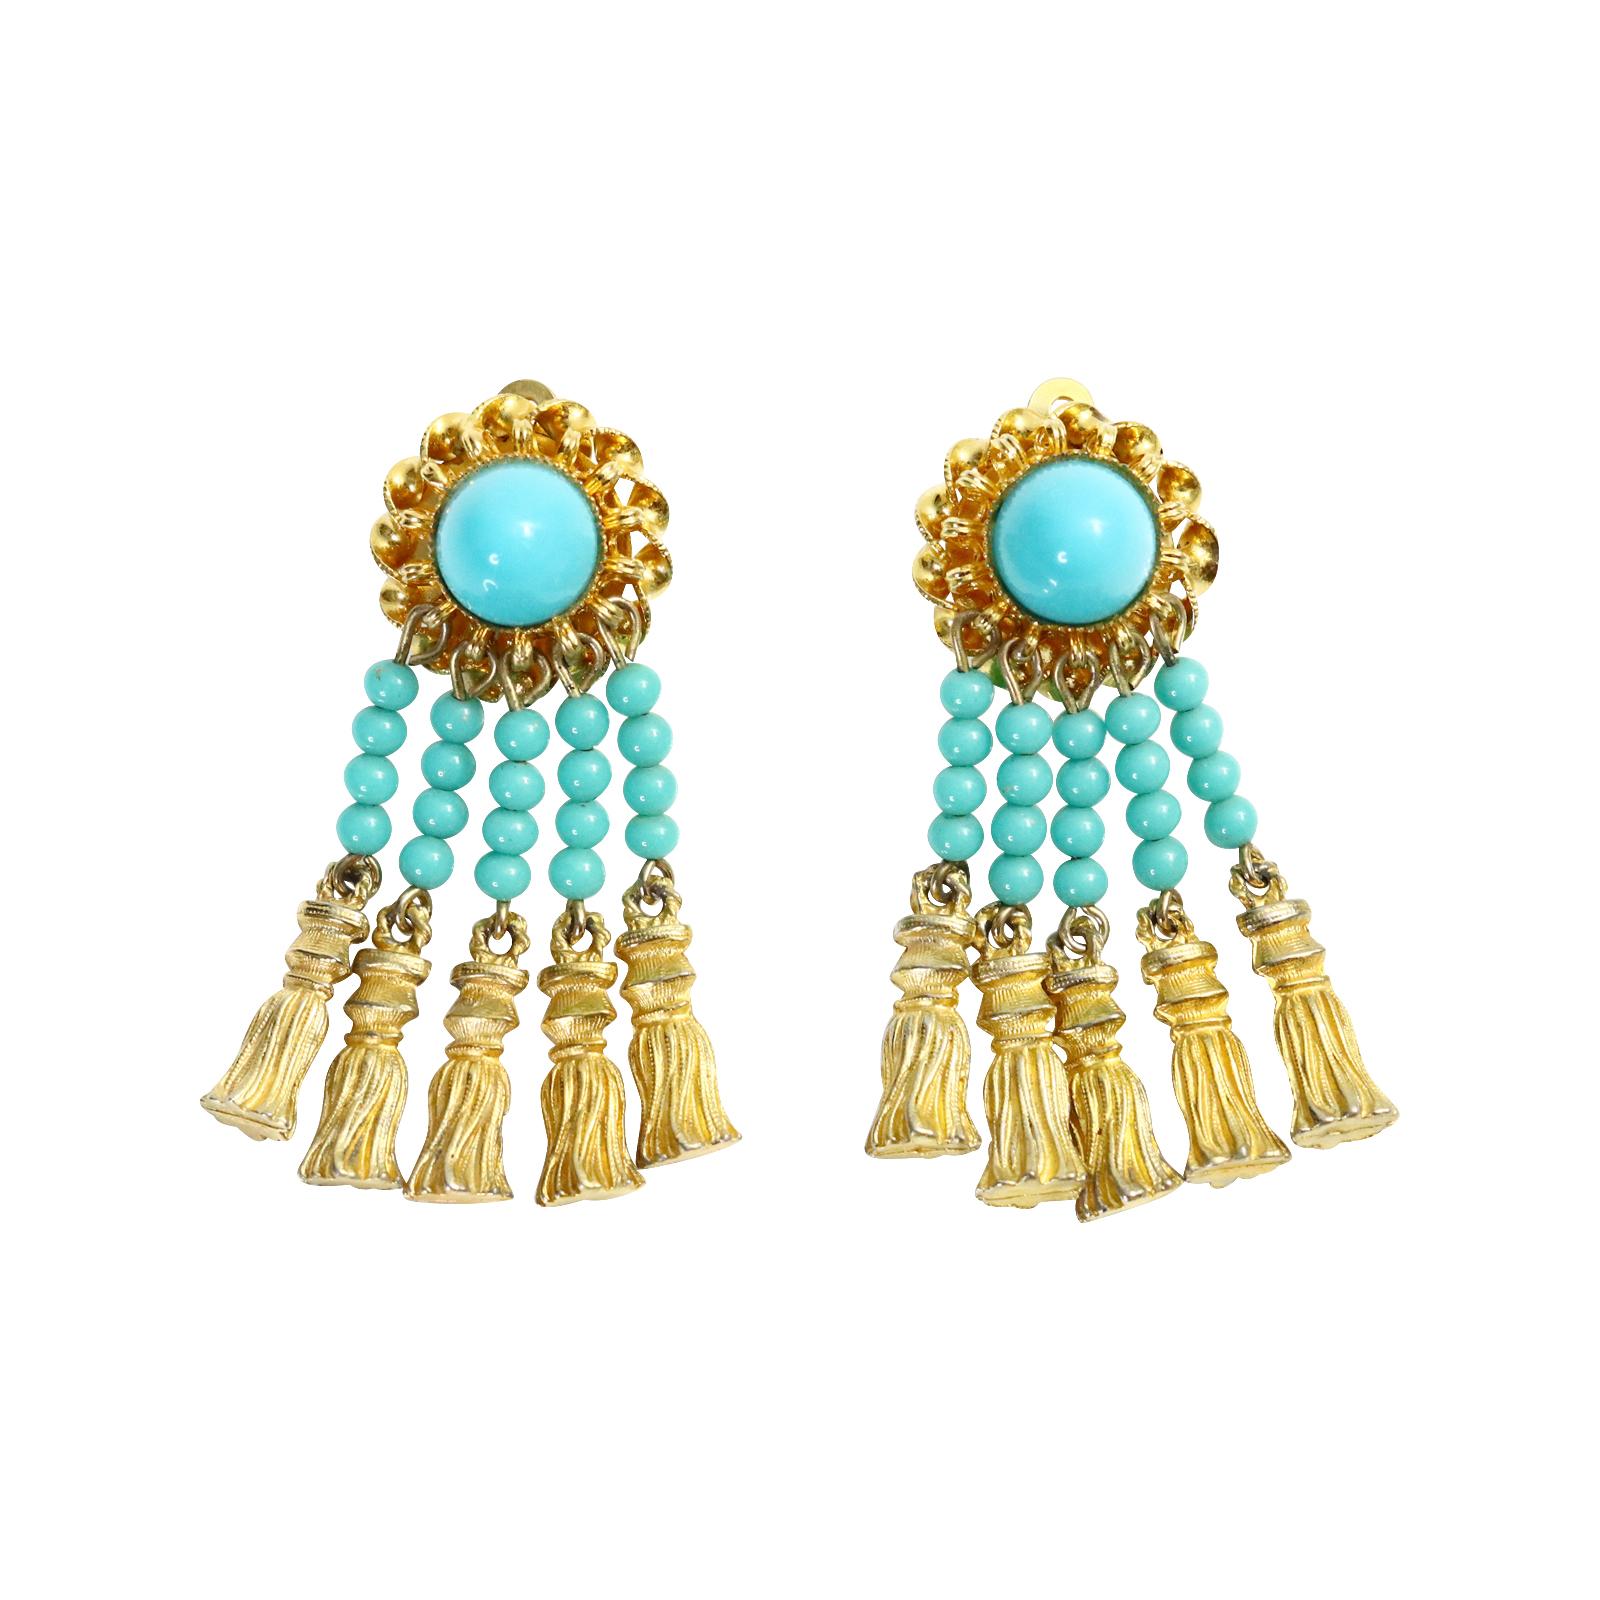 Modern Vintage deLillo Faux Turquoise and Gold Tone Dangling Earrings Circa 1970s For Sale